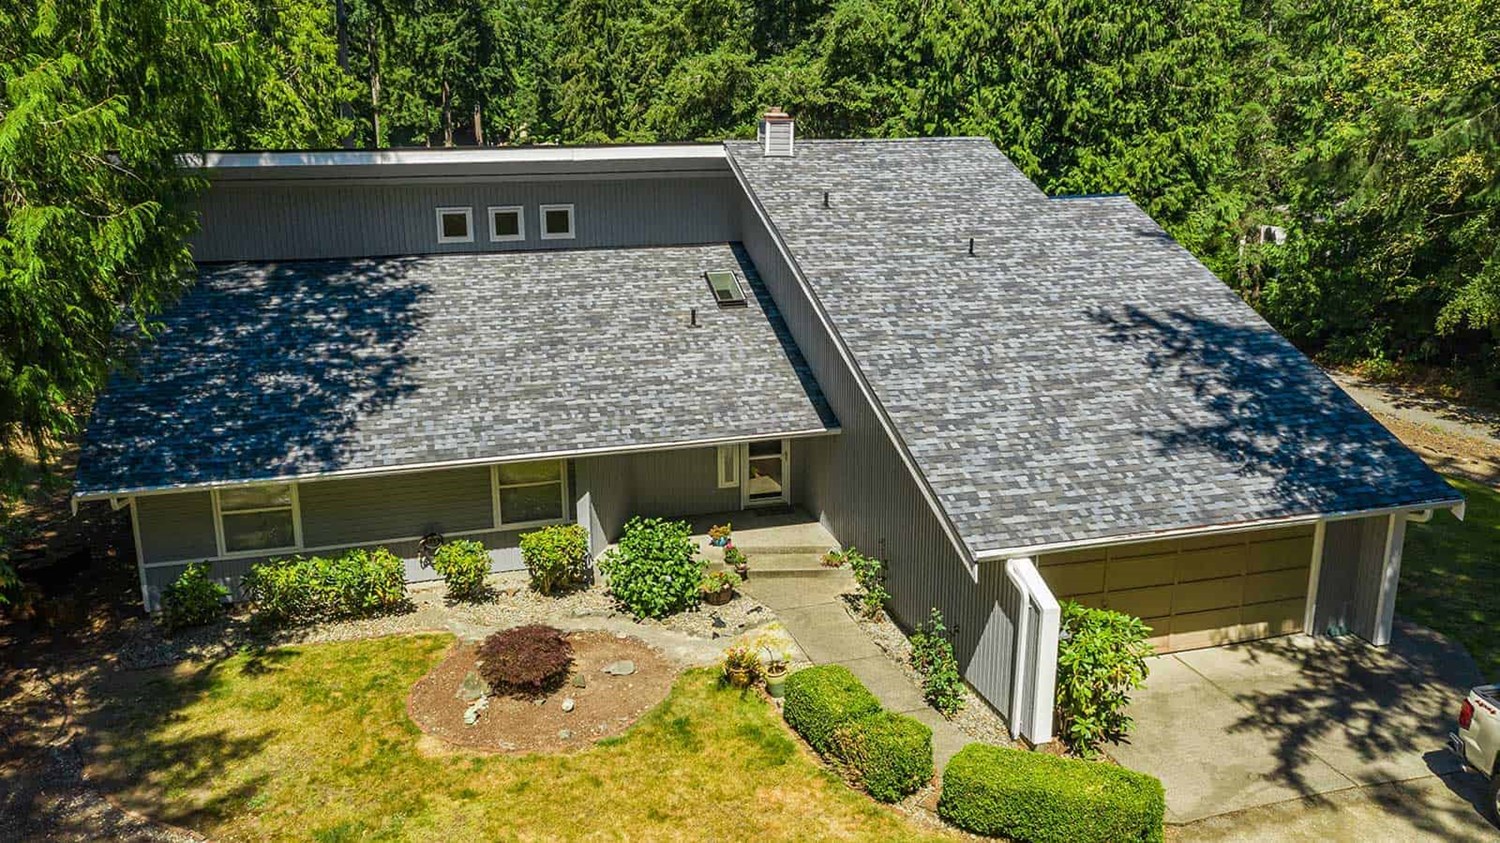 Pacific Wave Owens Corning Duration Designer Shingle replacement in Gig Harbor